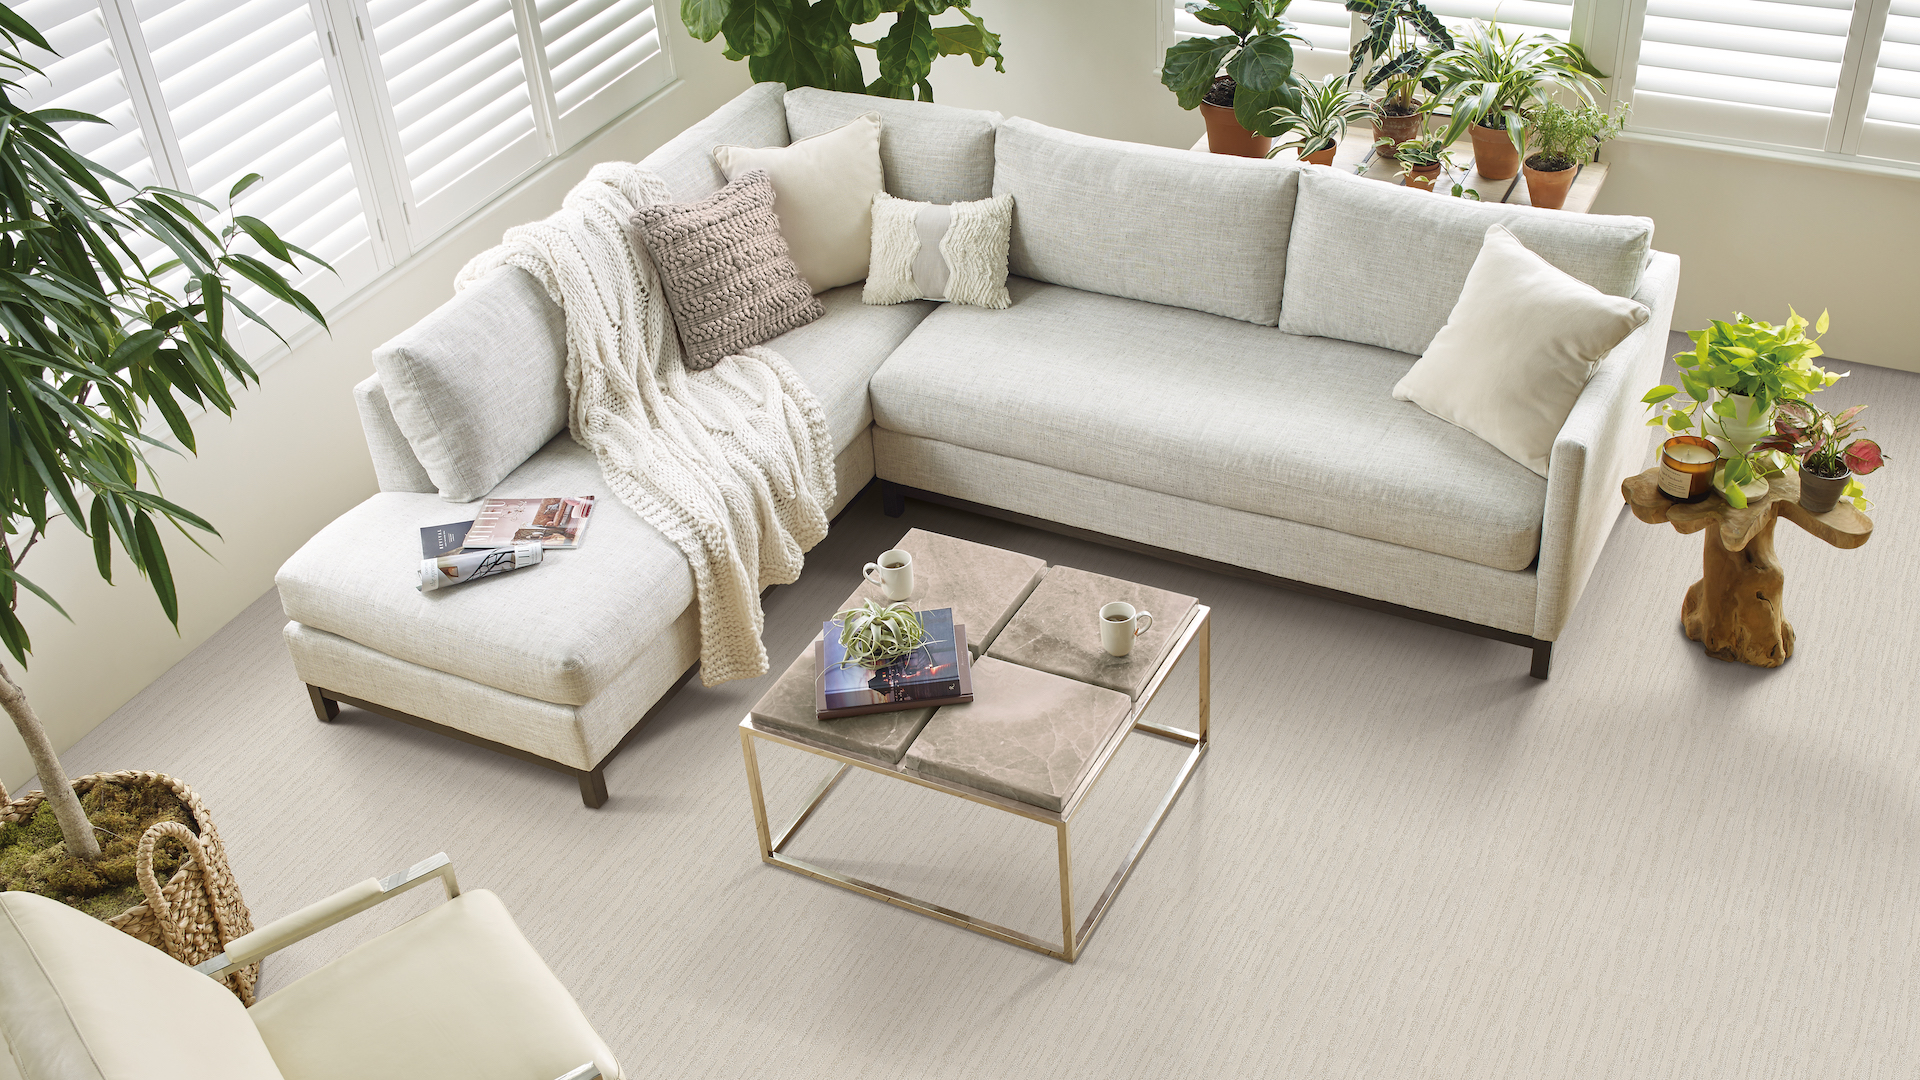 textured off white carpets in a bright monochromatic living room with beautiful greenery